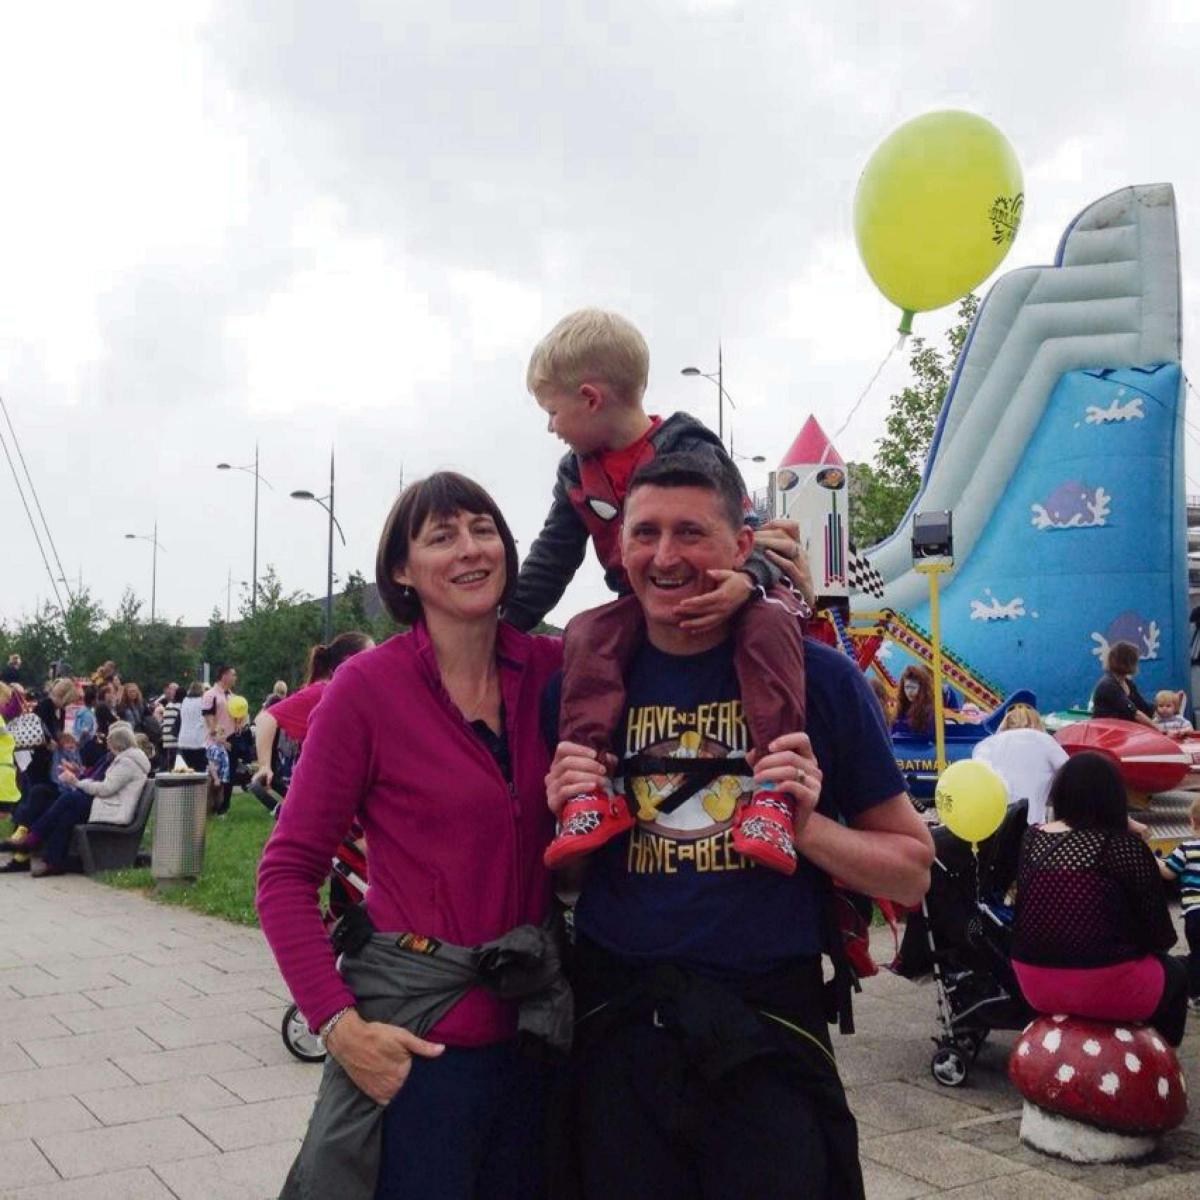 CELEBRATING: Tina, Gary and Tomos Williams from Chepstow